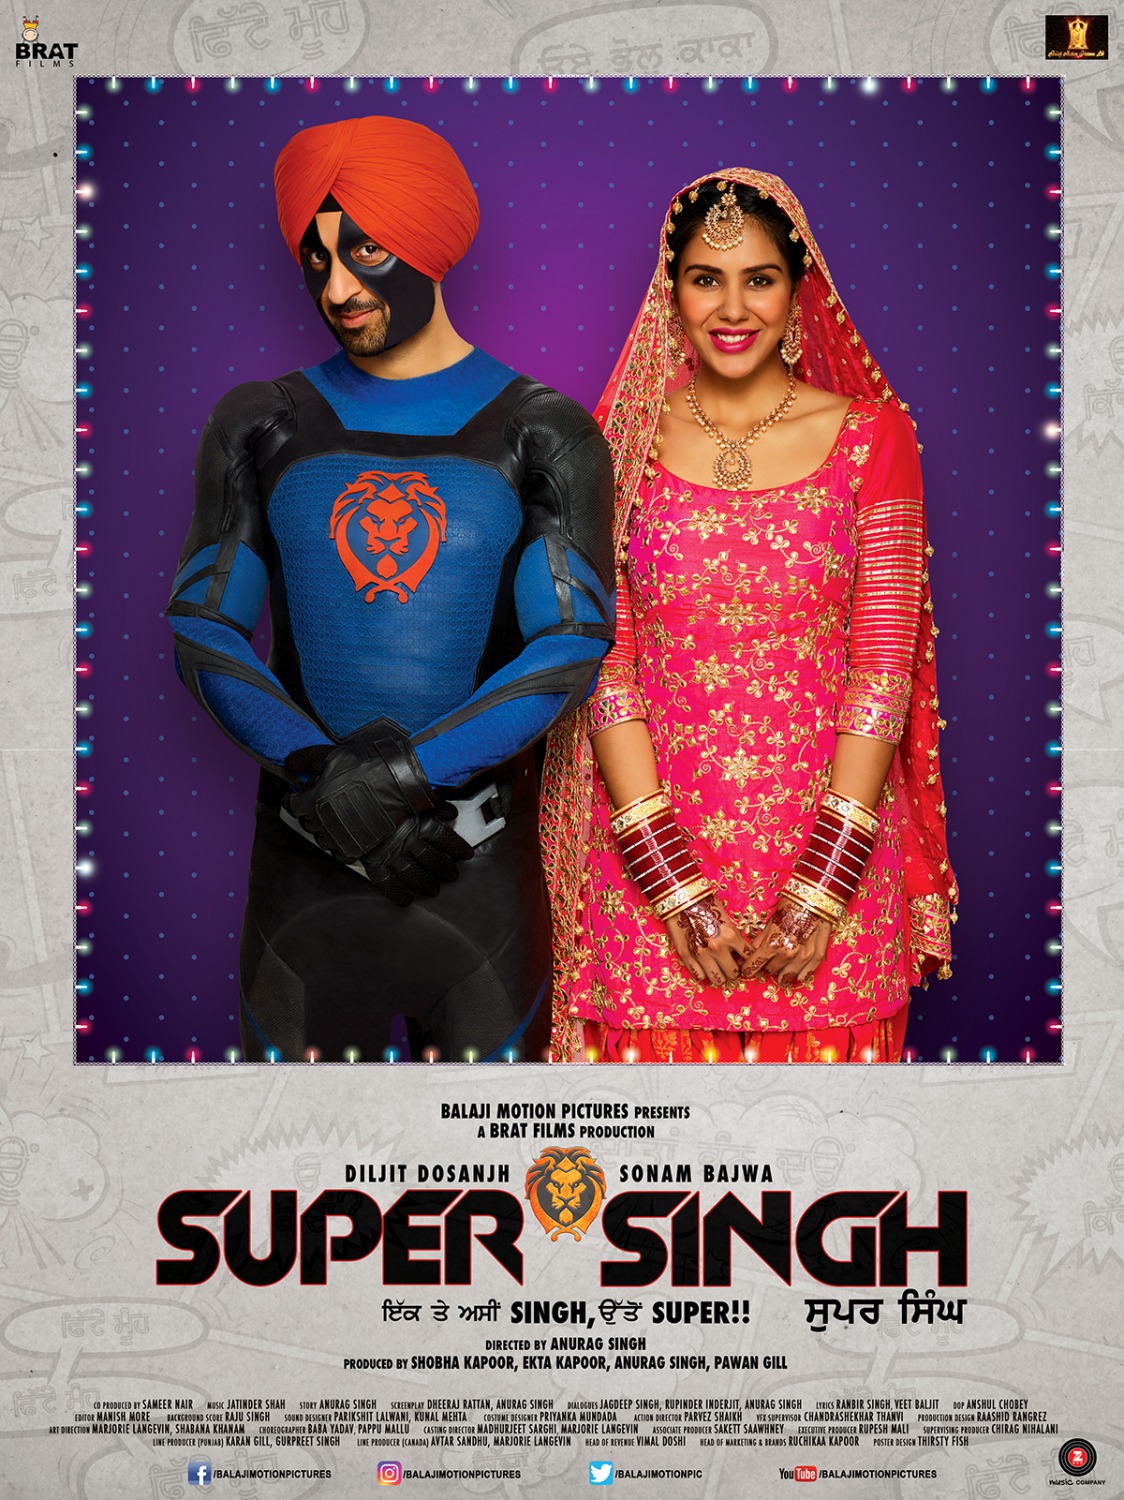 Extra Large Movie Poster Image for Super Singh (#4 of 4)